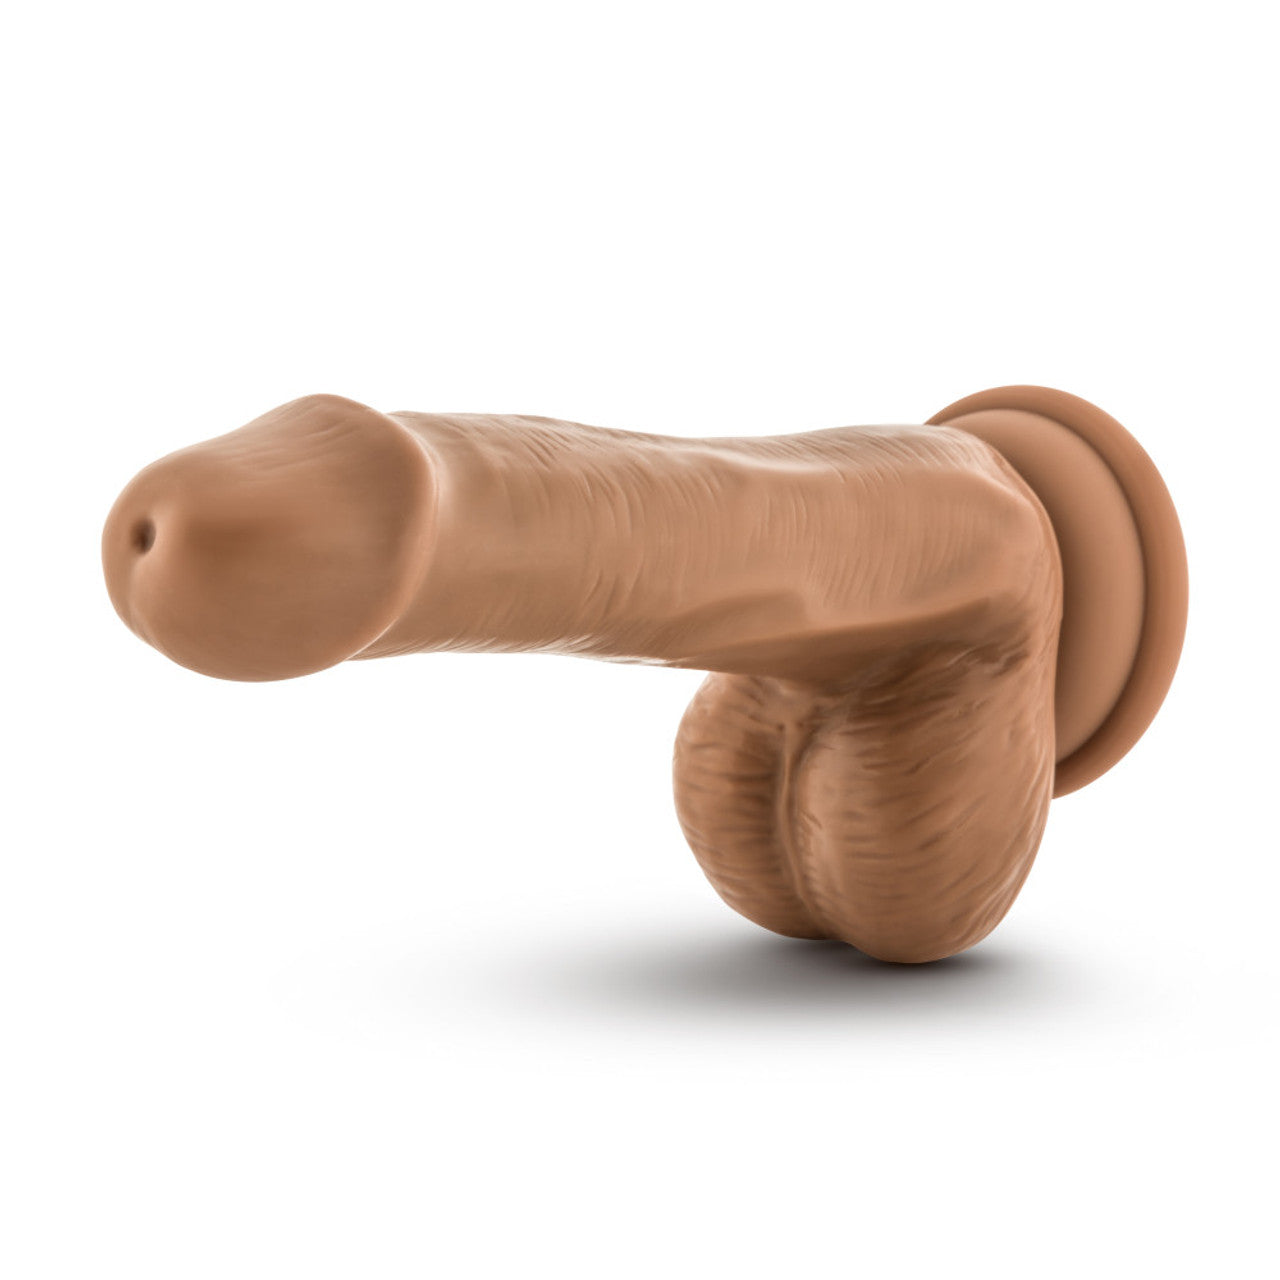 Dr. Jeffrey 6.5 Inch Dildo With Balls - Tan - Thorn & Feather